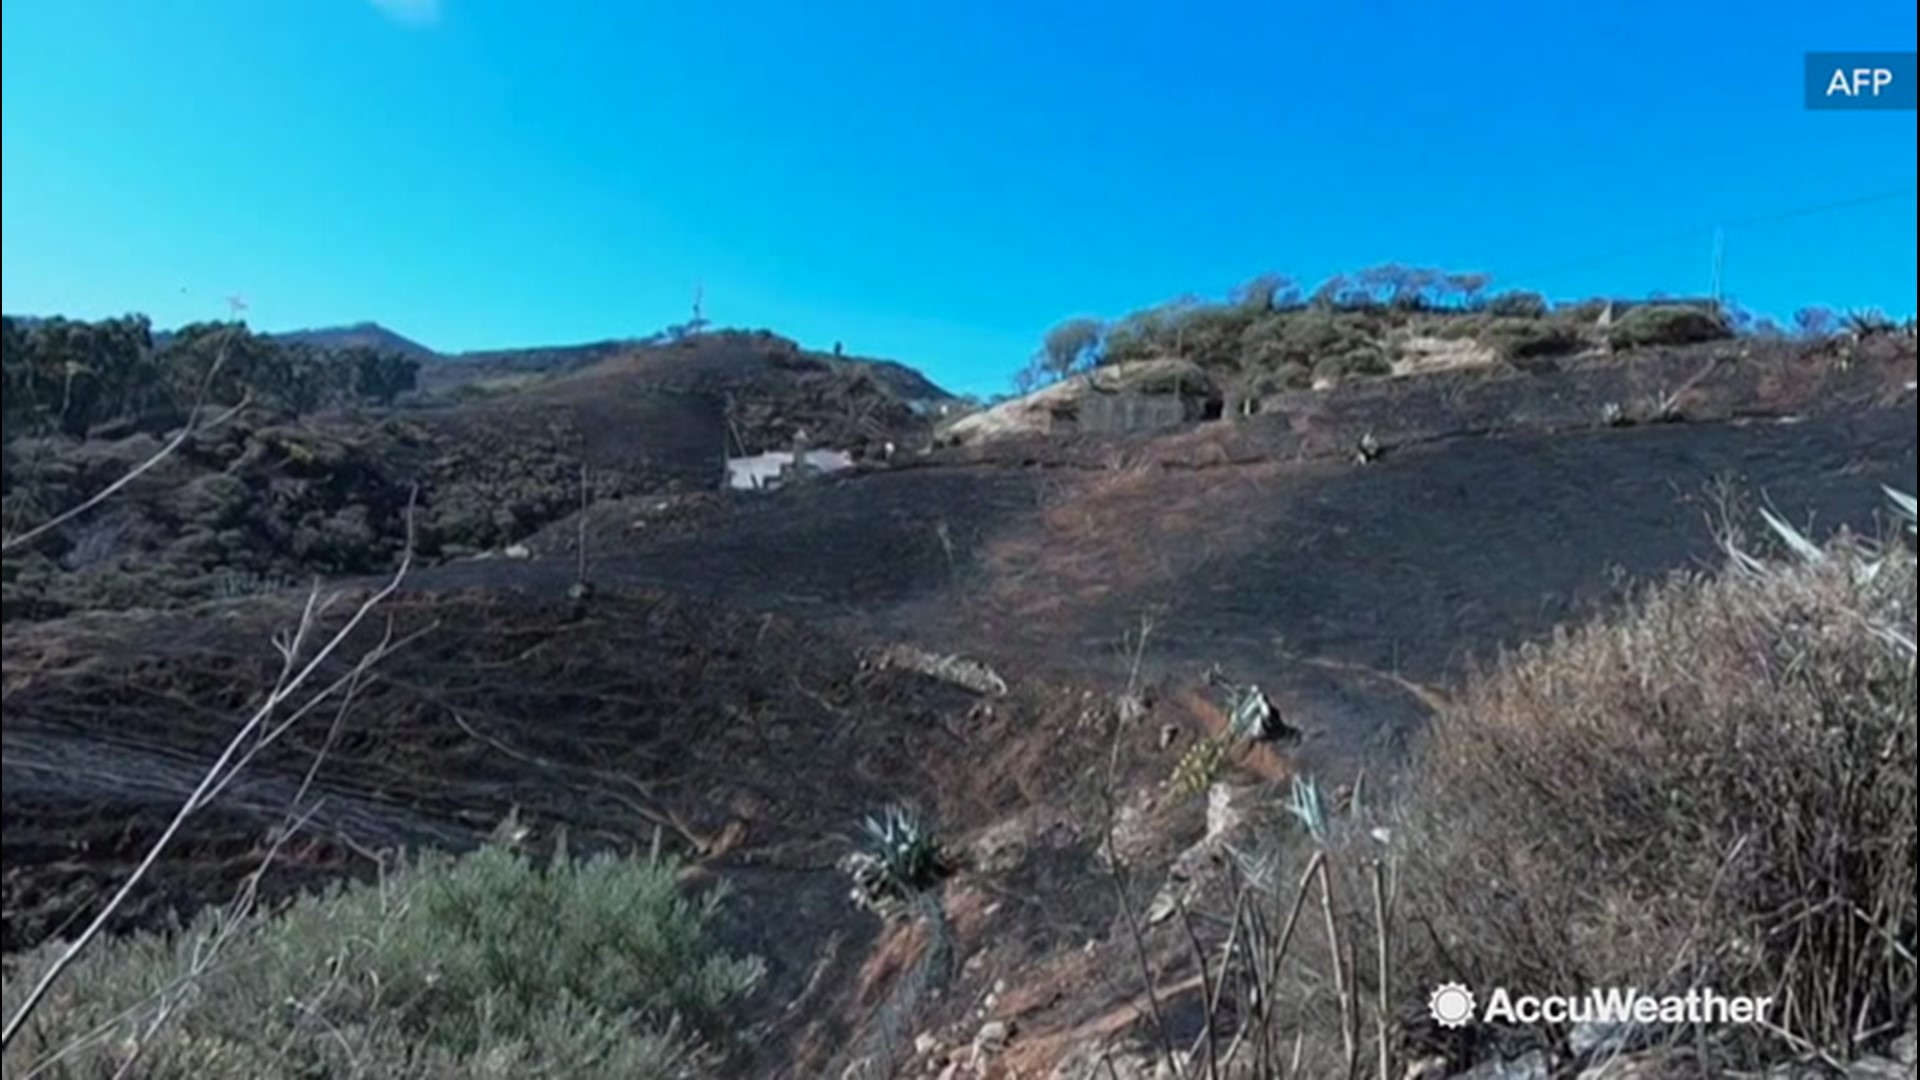 The hills in Las Palmas, Canary Islands, Spain, are charred after a wildfire scorched more than 10,000 acres of land. The fire sparked up on Aug. 18 and quickly spread, forcing 9,000 people to flee their homes. Firefighting crews are still on scene, but winds have calmed down, making their efforts a bit easier.